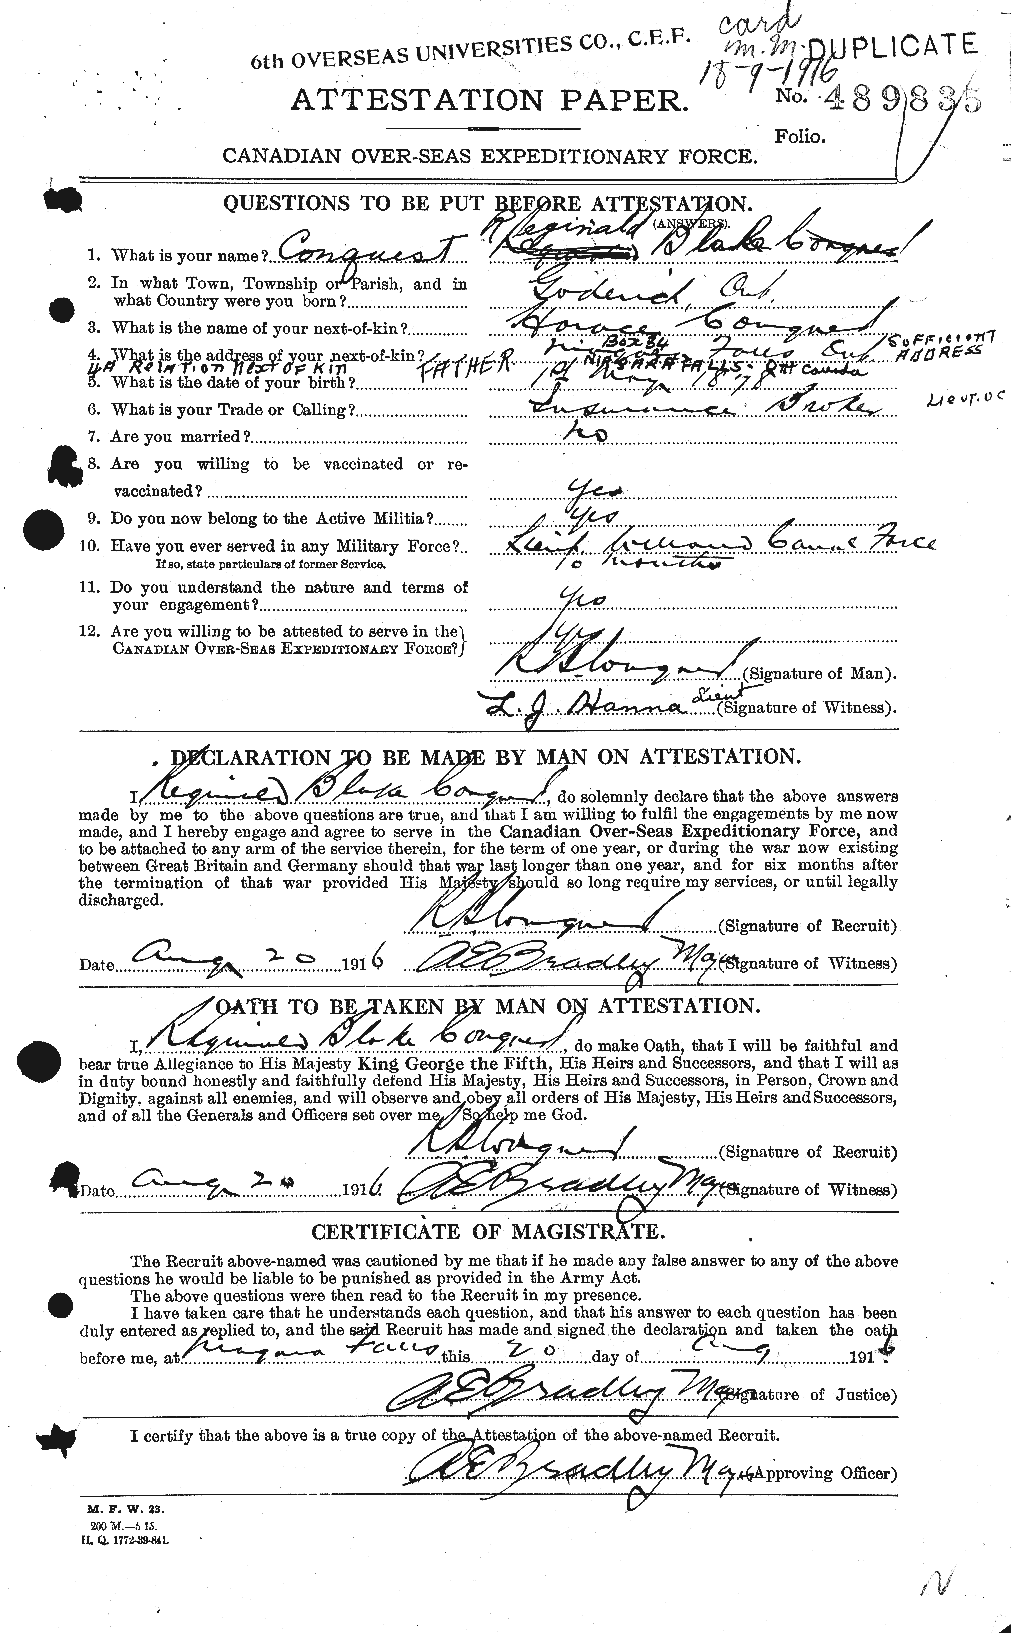 Personnel Records of the First World War - CEF 071242a